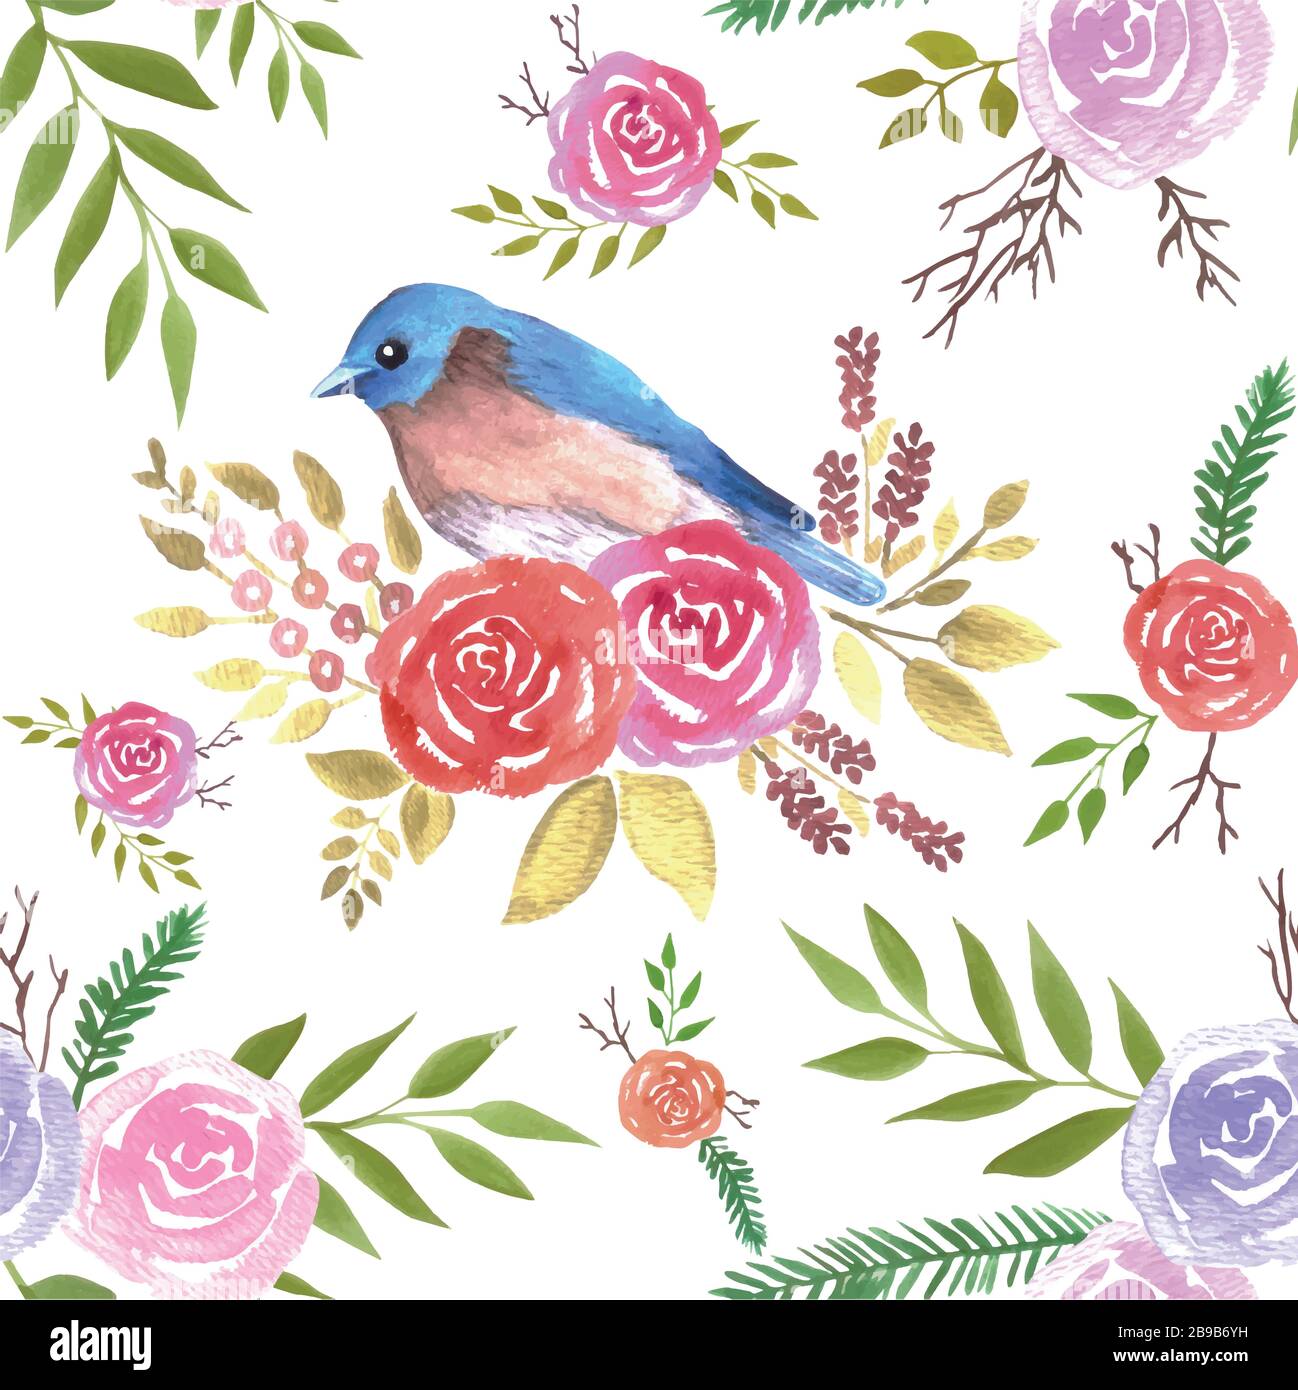 Eastern bluebird or Sialia sialis on seamless rose pattern watercolor background Stock Vector